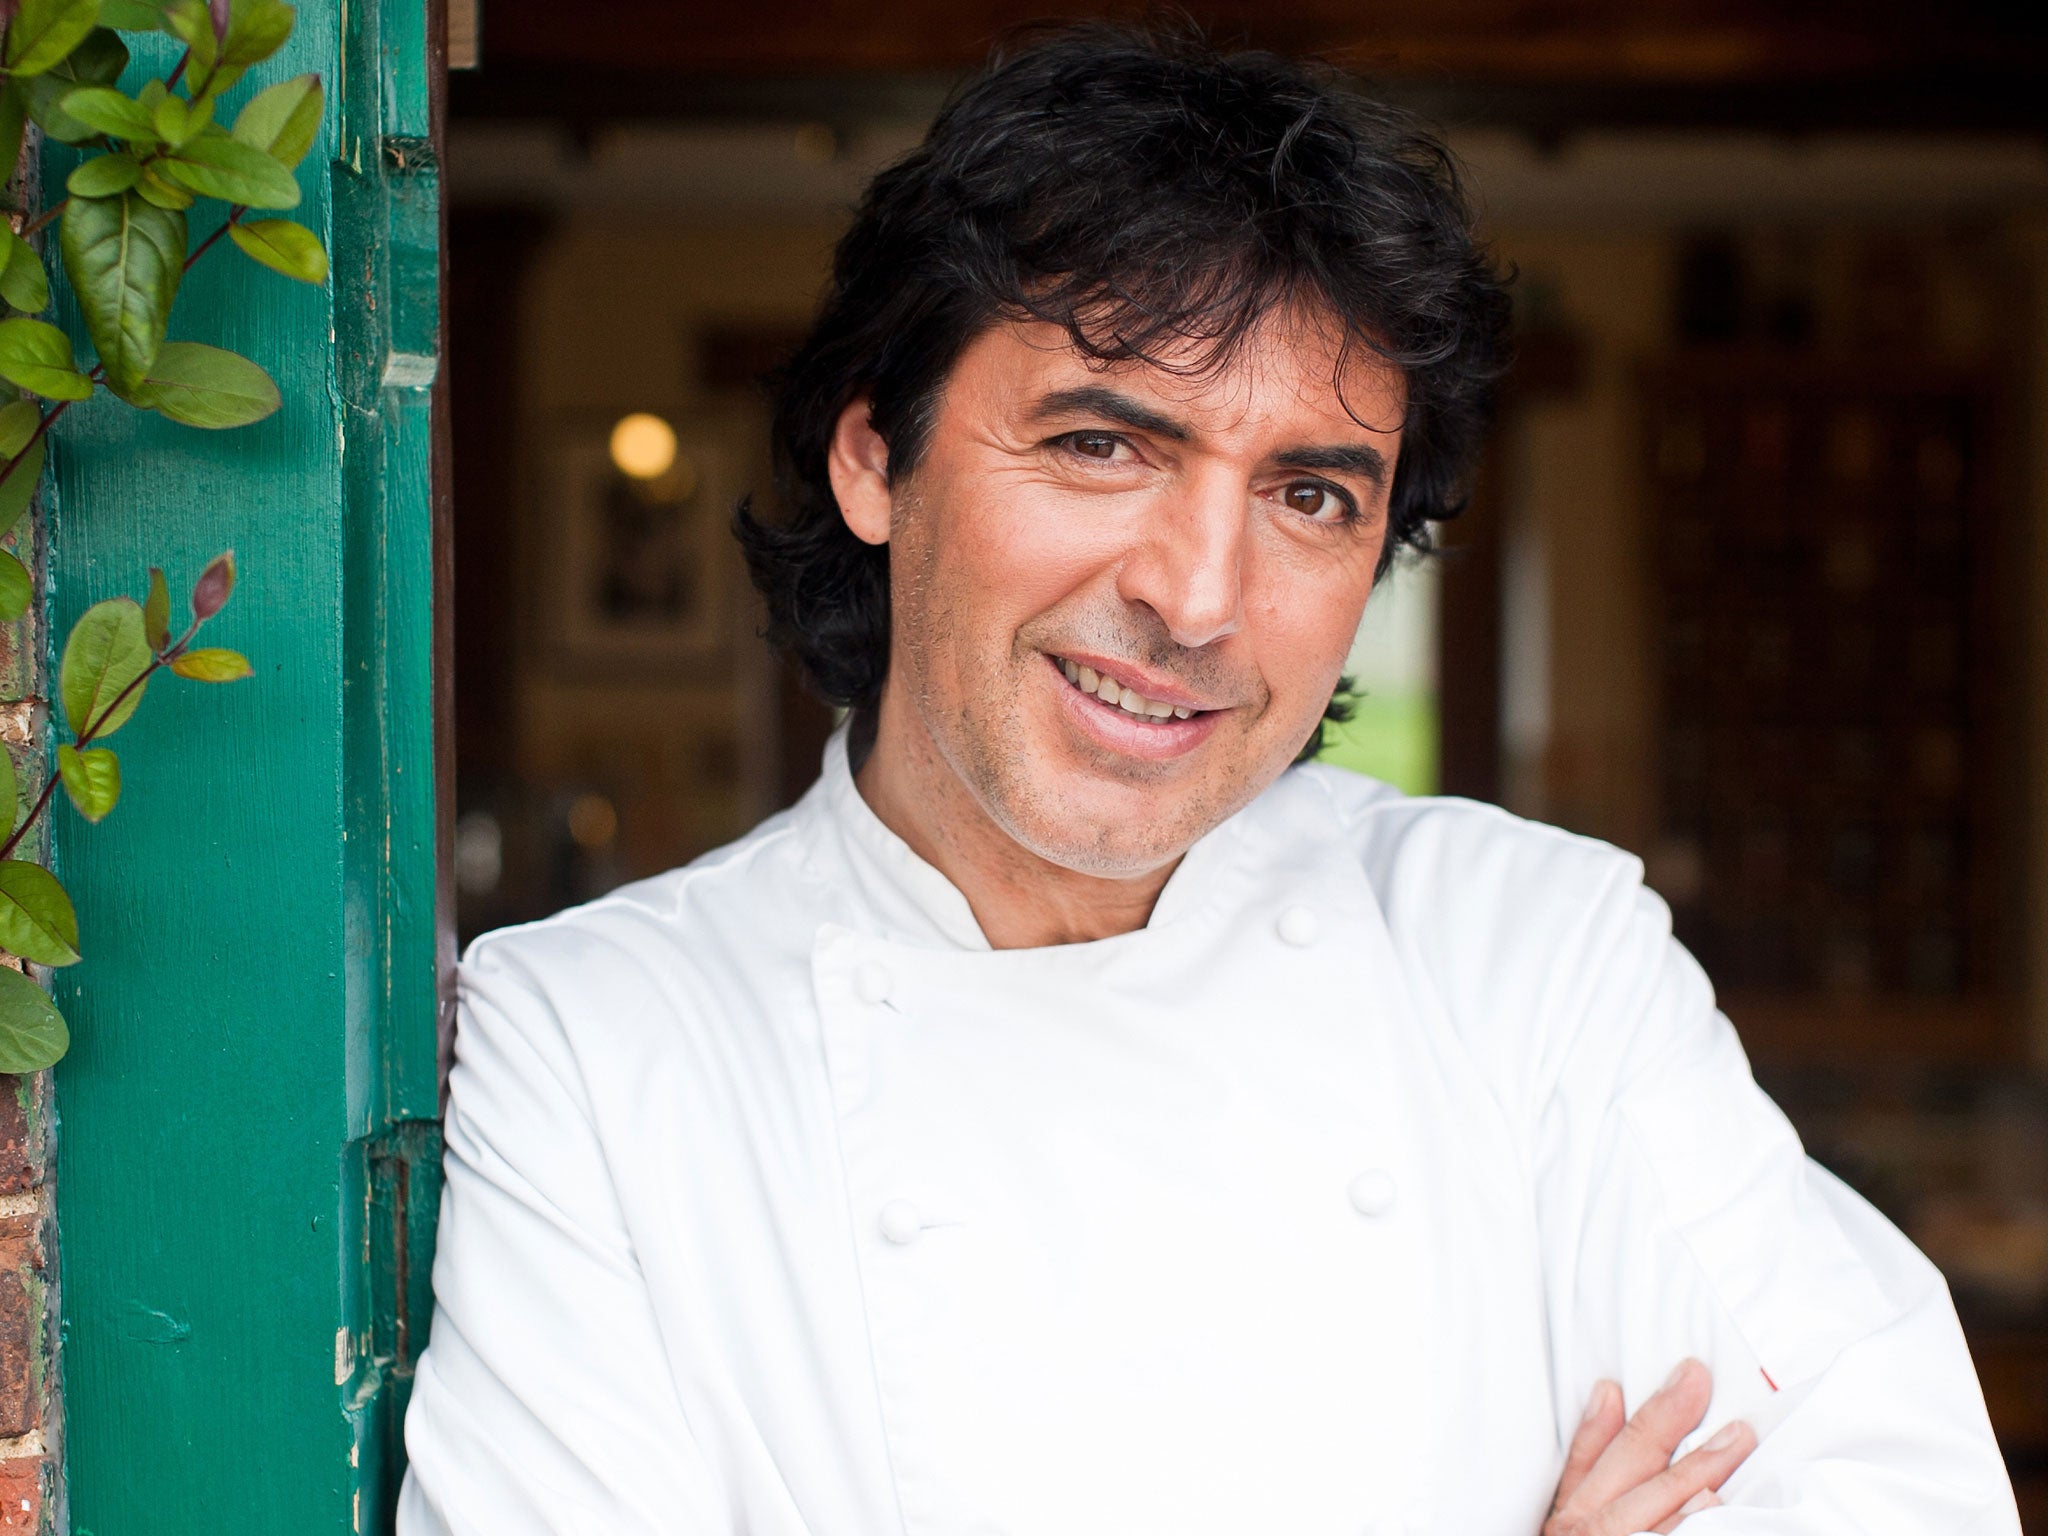 Jean-Christophe Novelli: 'So many chefs use excessive fat to enhance flavours. I use herbs and spices'